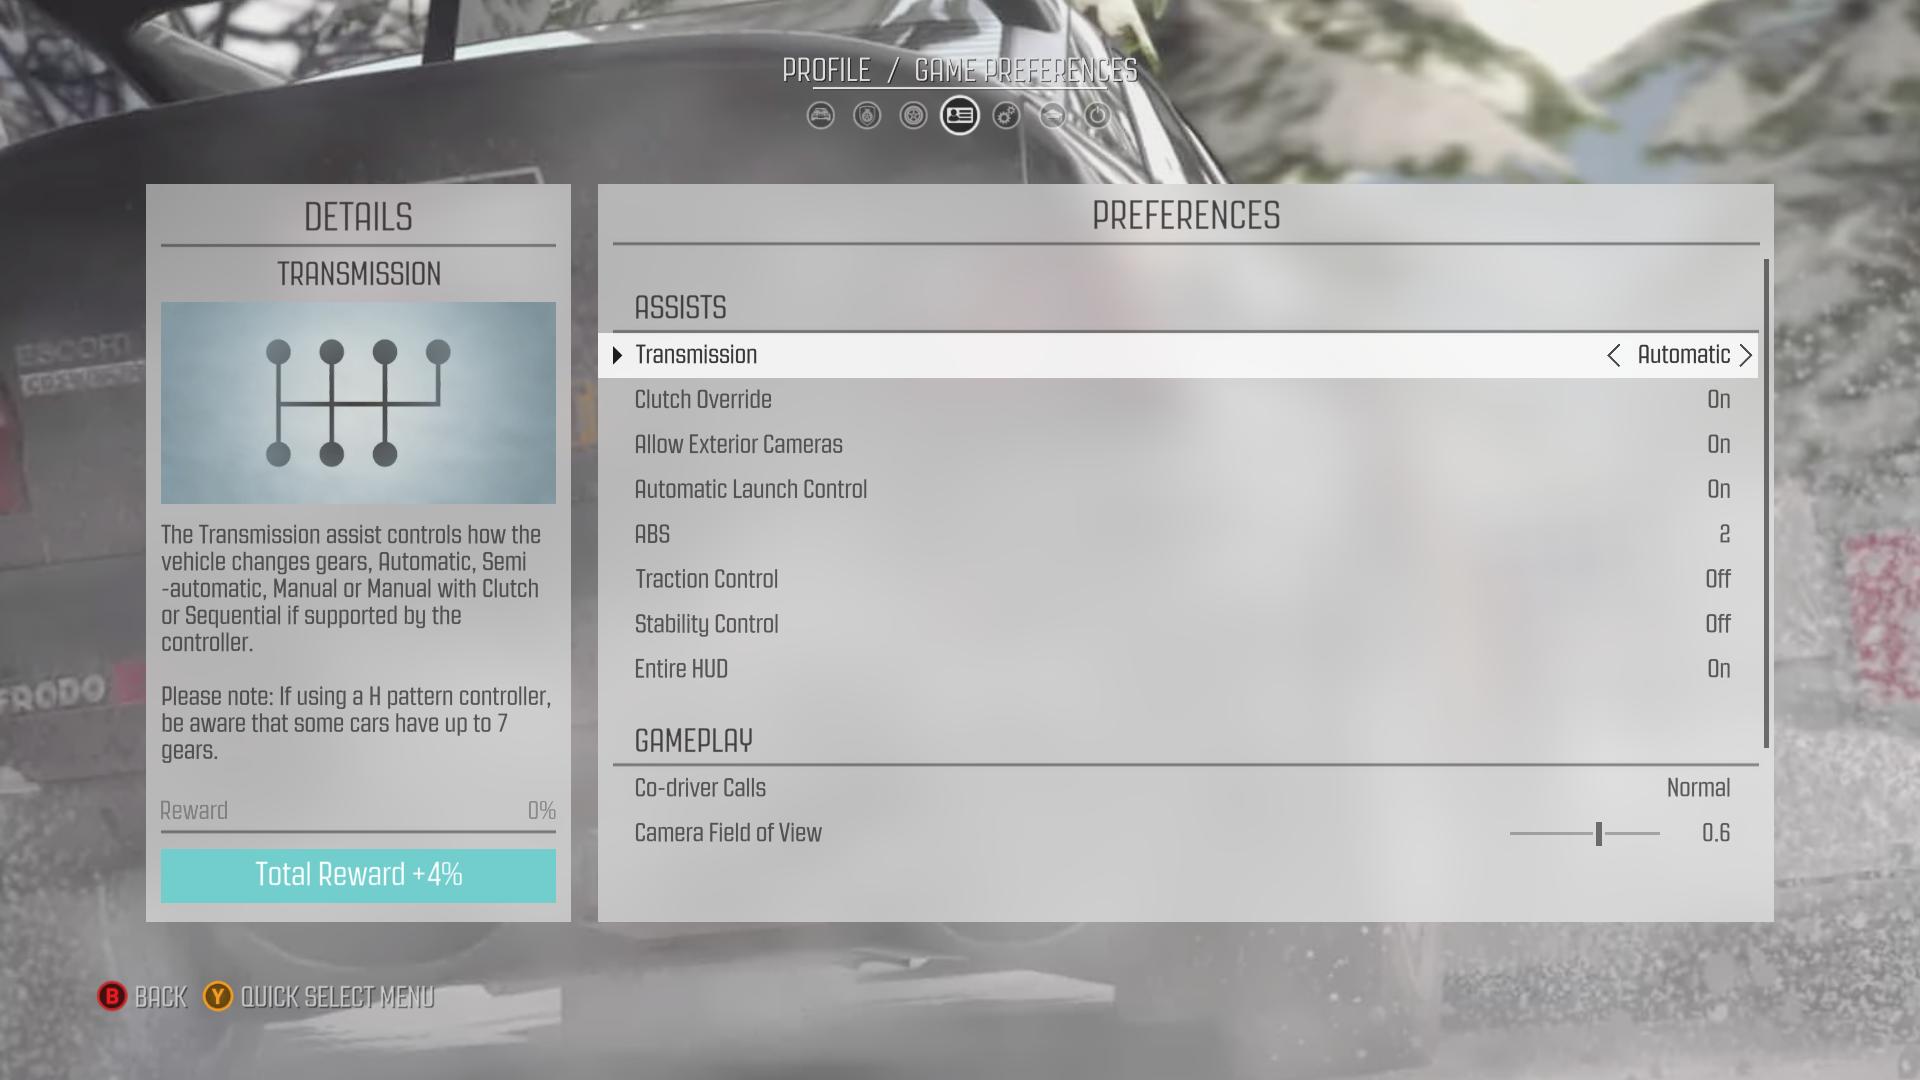 Dirt Rally 2.0 - Try these controller settings for excellent car control 